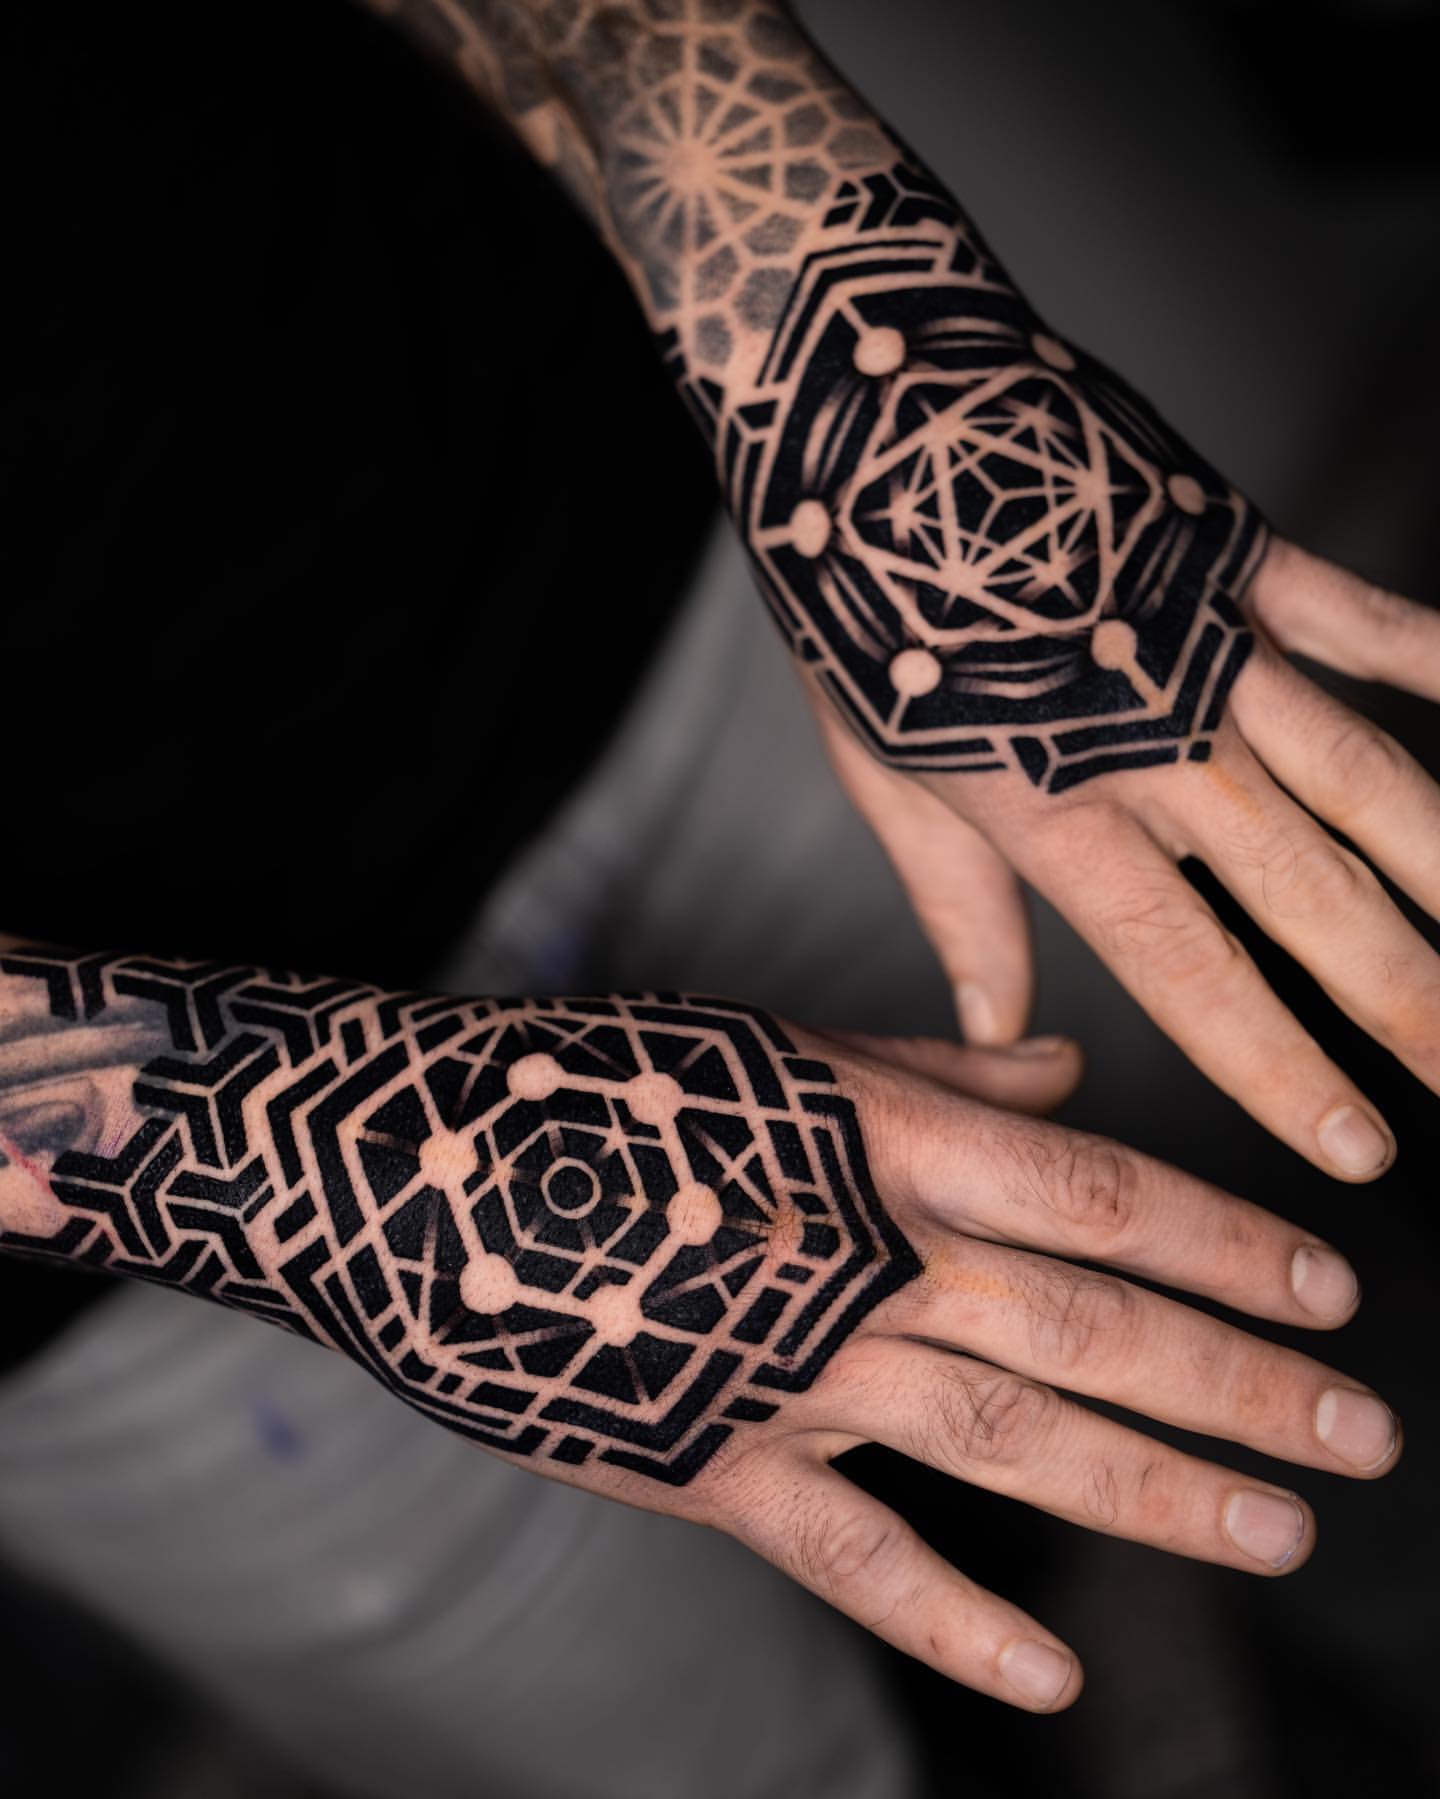 50 Sacred Geometry Tattoo Ideas That Will Take Your Breath Away - ARTWOONZ